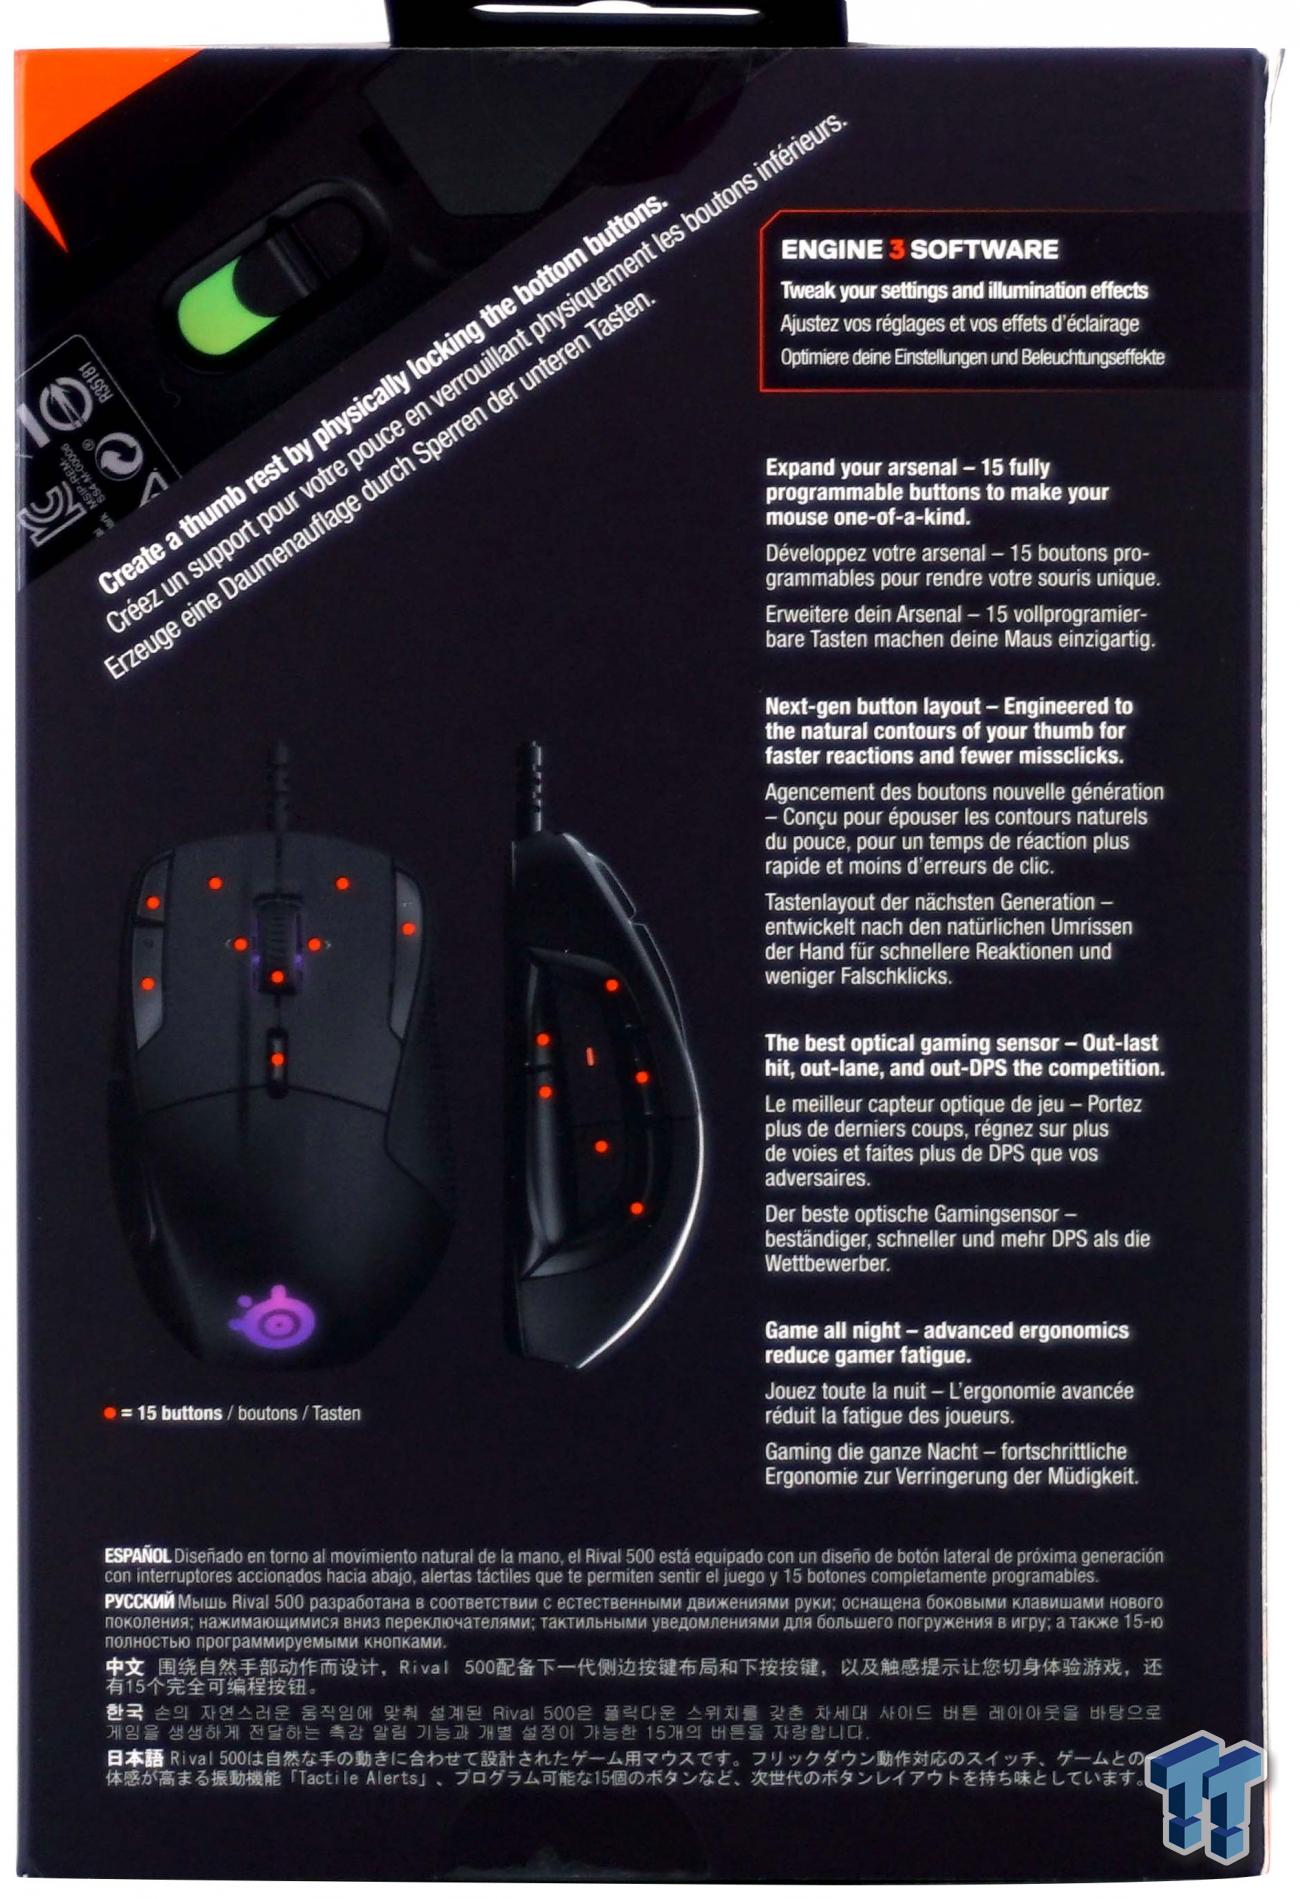 16,000 CPI SteelSeries Rival 500 MMO MOBA 15-Button Programmable Gaming Mouse 